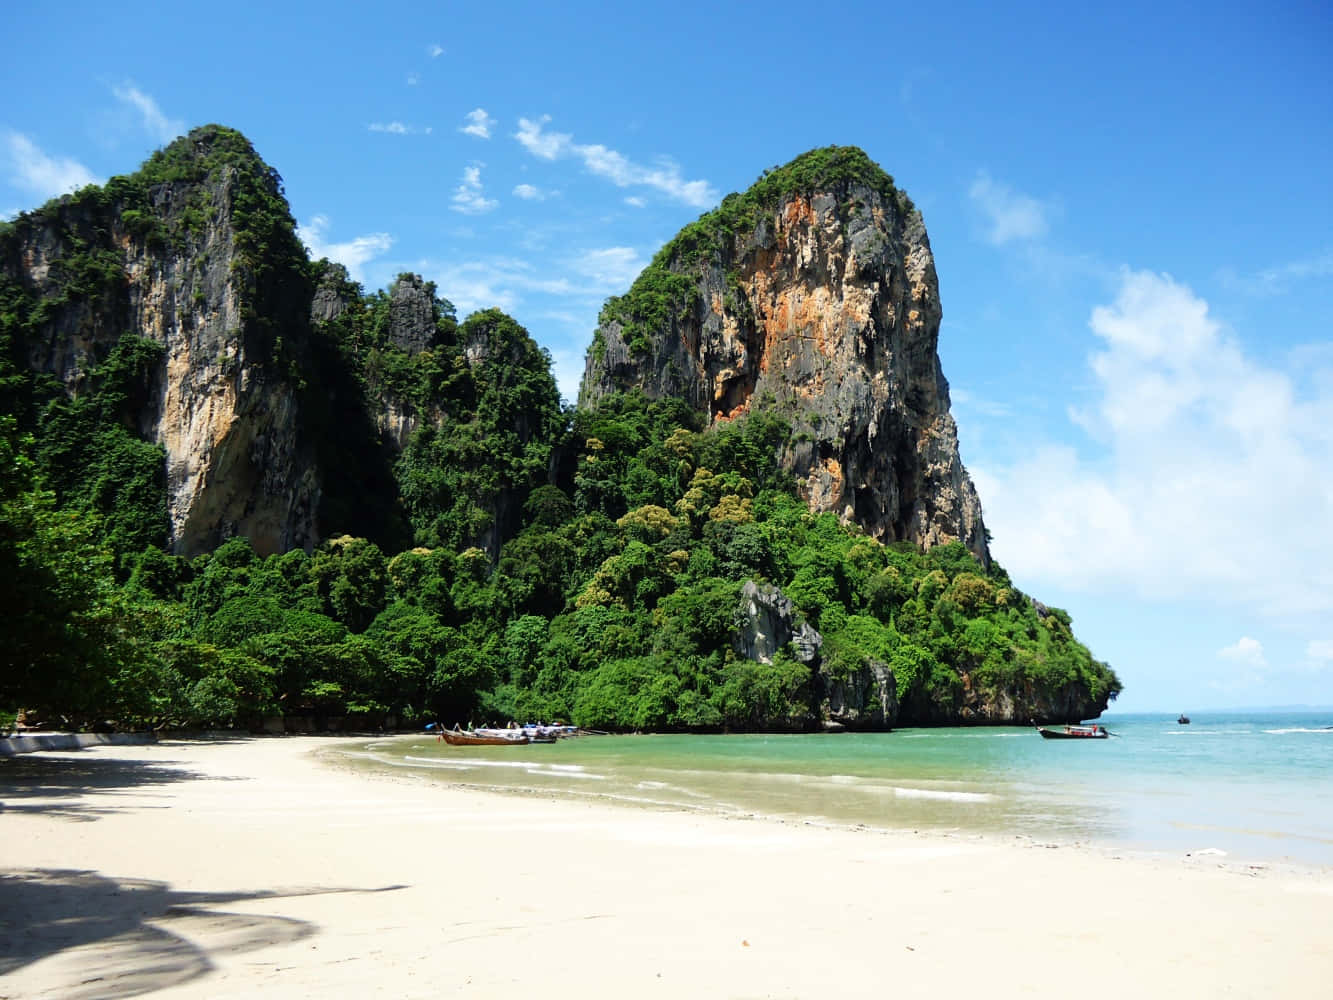 A Beach With A Large Rock Formation In The Background